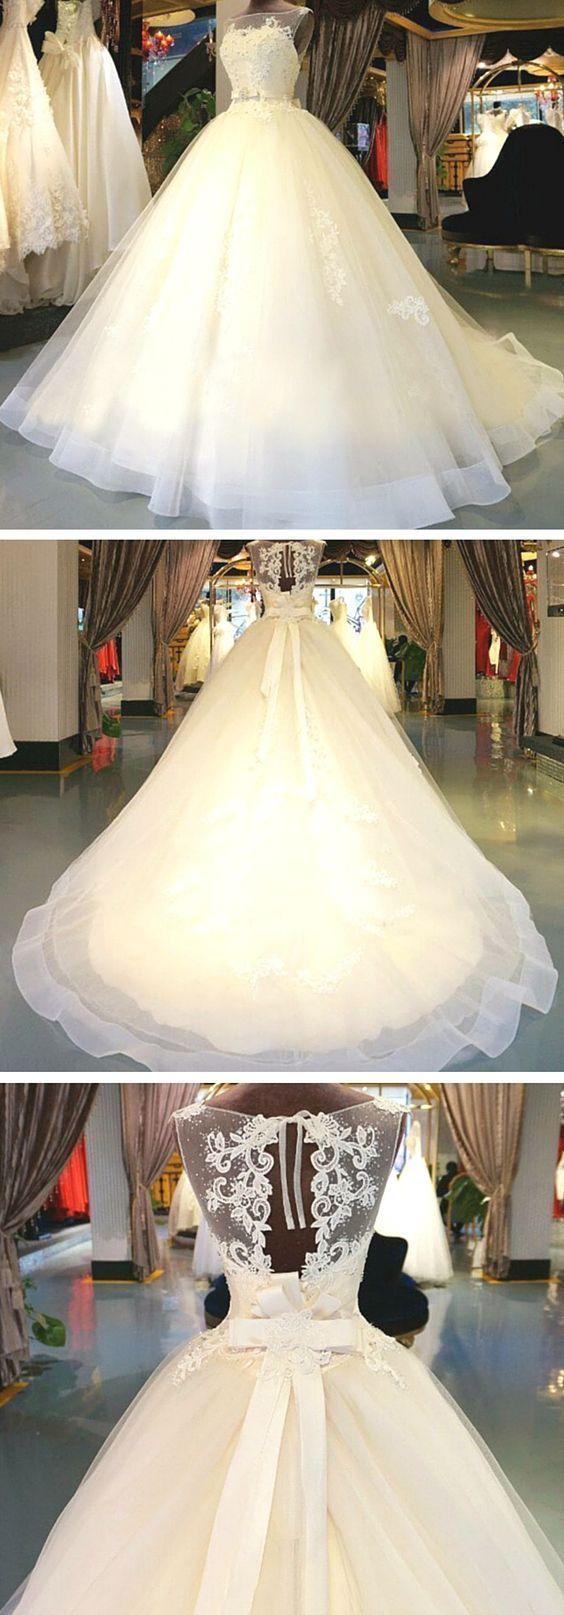 Wedding - Princess Ball Gown White Tulle Skirt Lace Bodice Wedding Gowns Wedding Dresses Unique Wedding Dress Bride Gowns